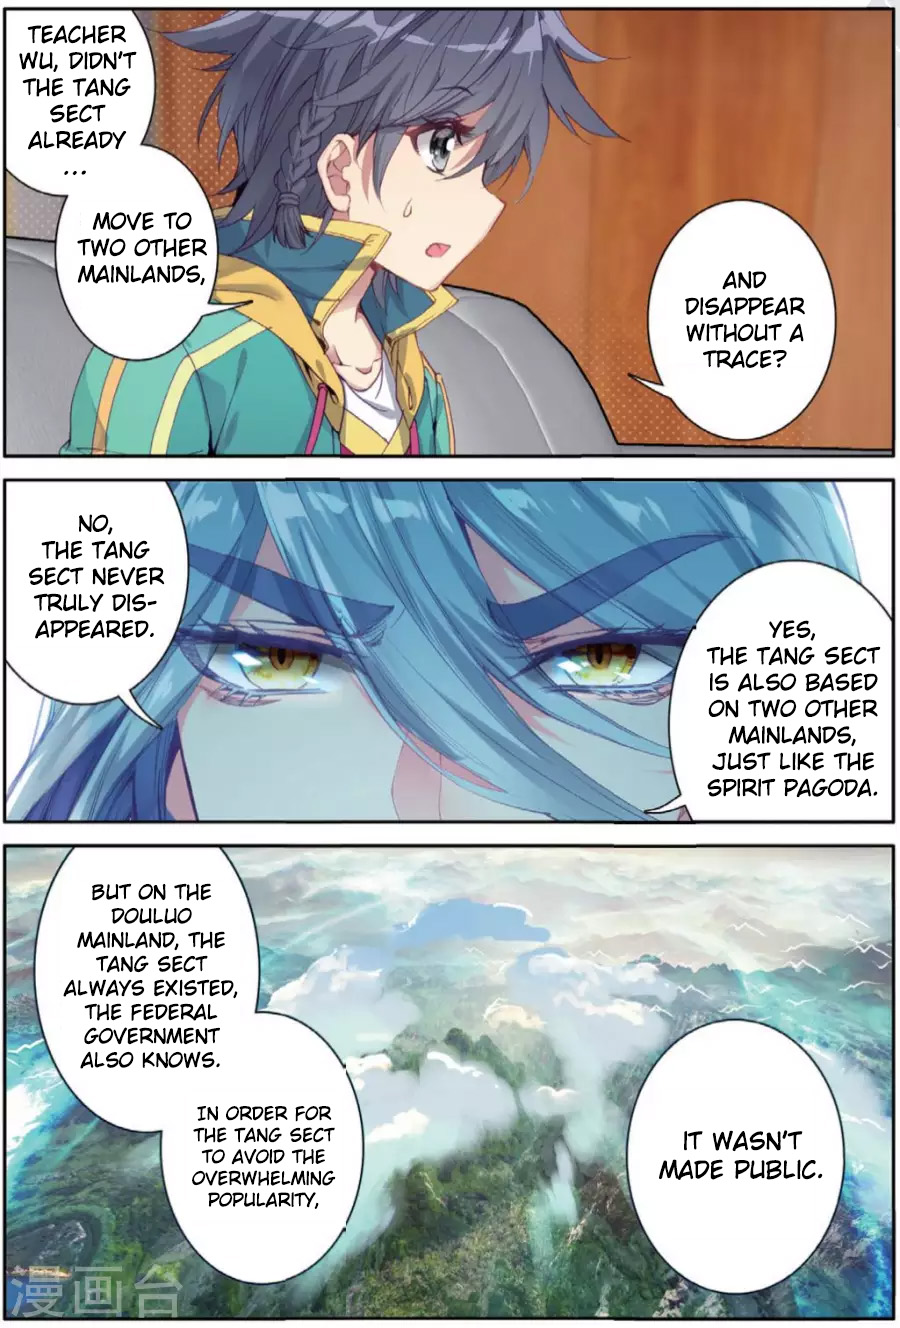 Soul Land III The Legend of the Dragon King Ch. 70 Tang Sect